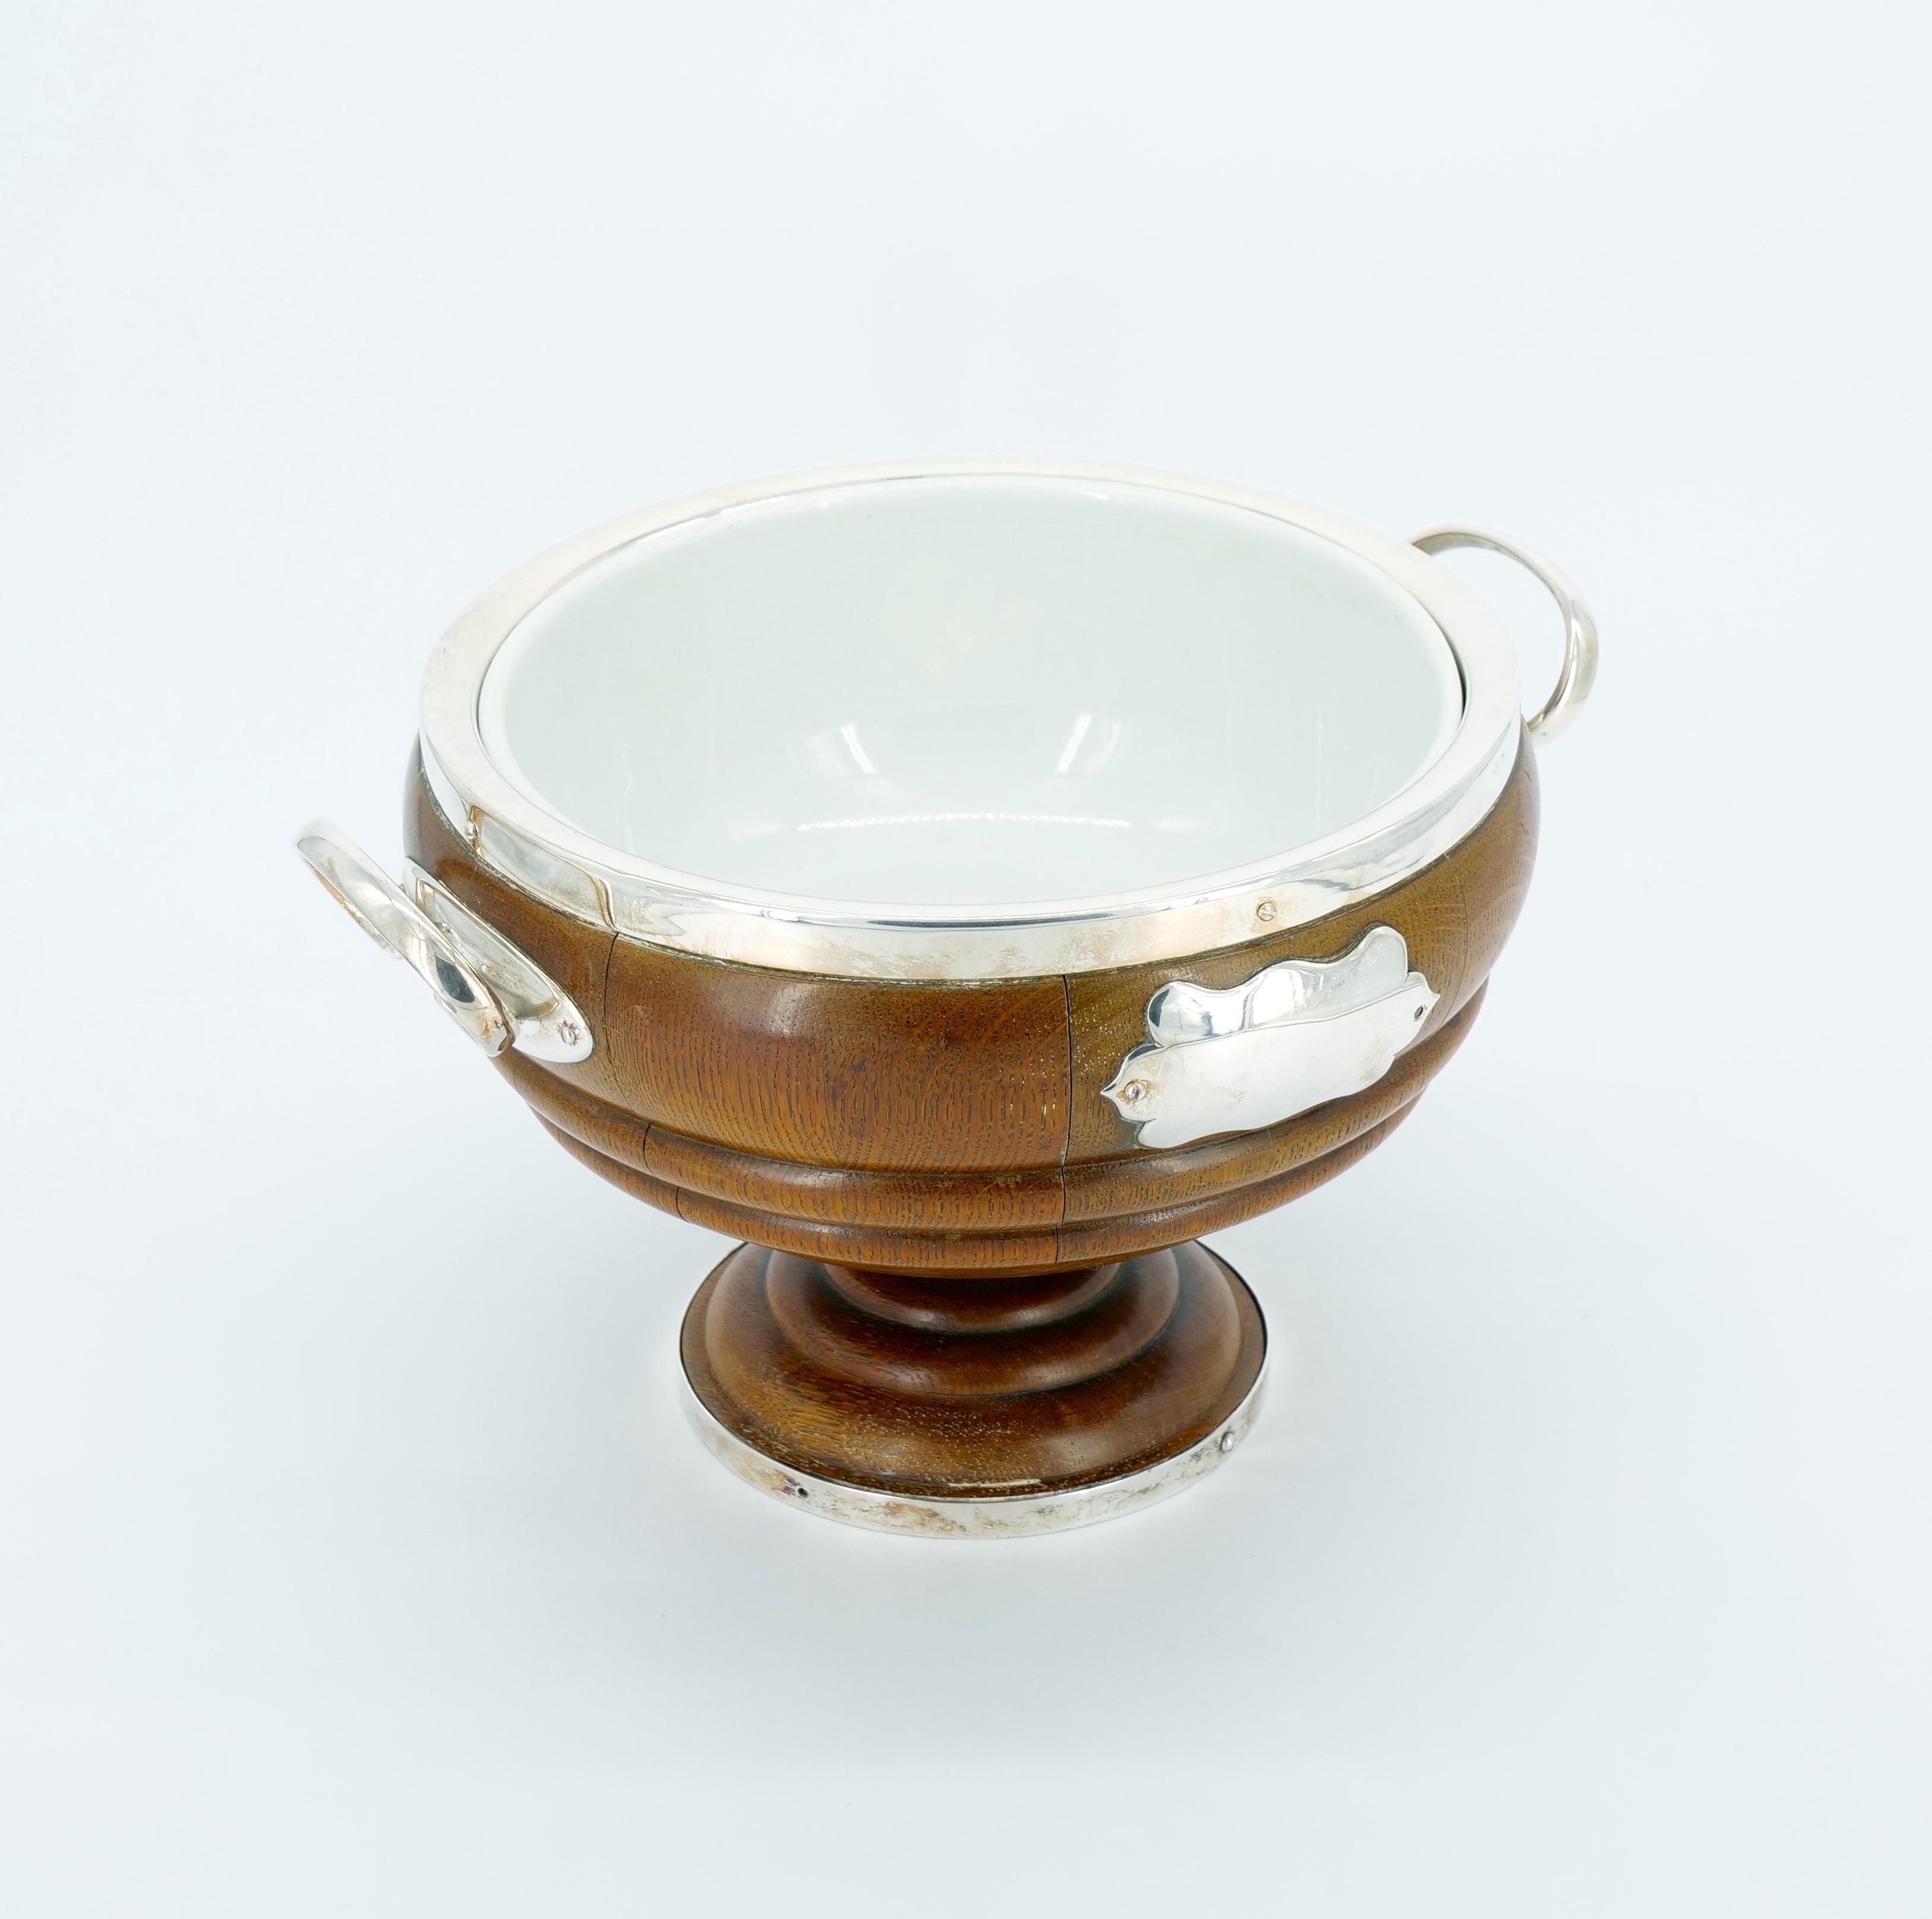 Elevate your table setting with this exquisite Old English Oak Exterior Holding Base and Porcelain Interior Decorative Serving Bowl. The timeless charm of this piece is evident in the meticulously crafted oak wood holding base, adorned with a silver